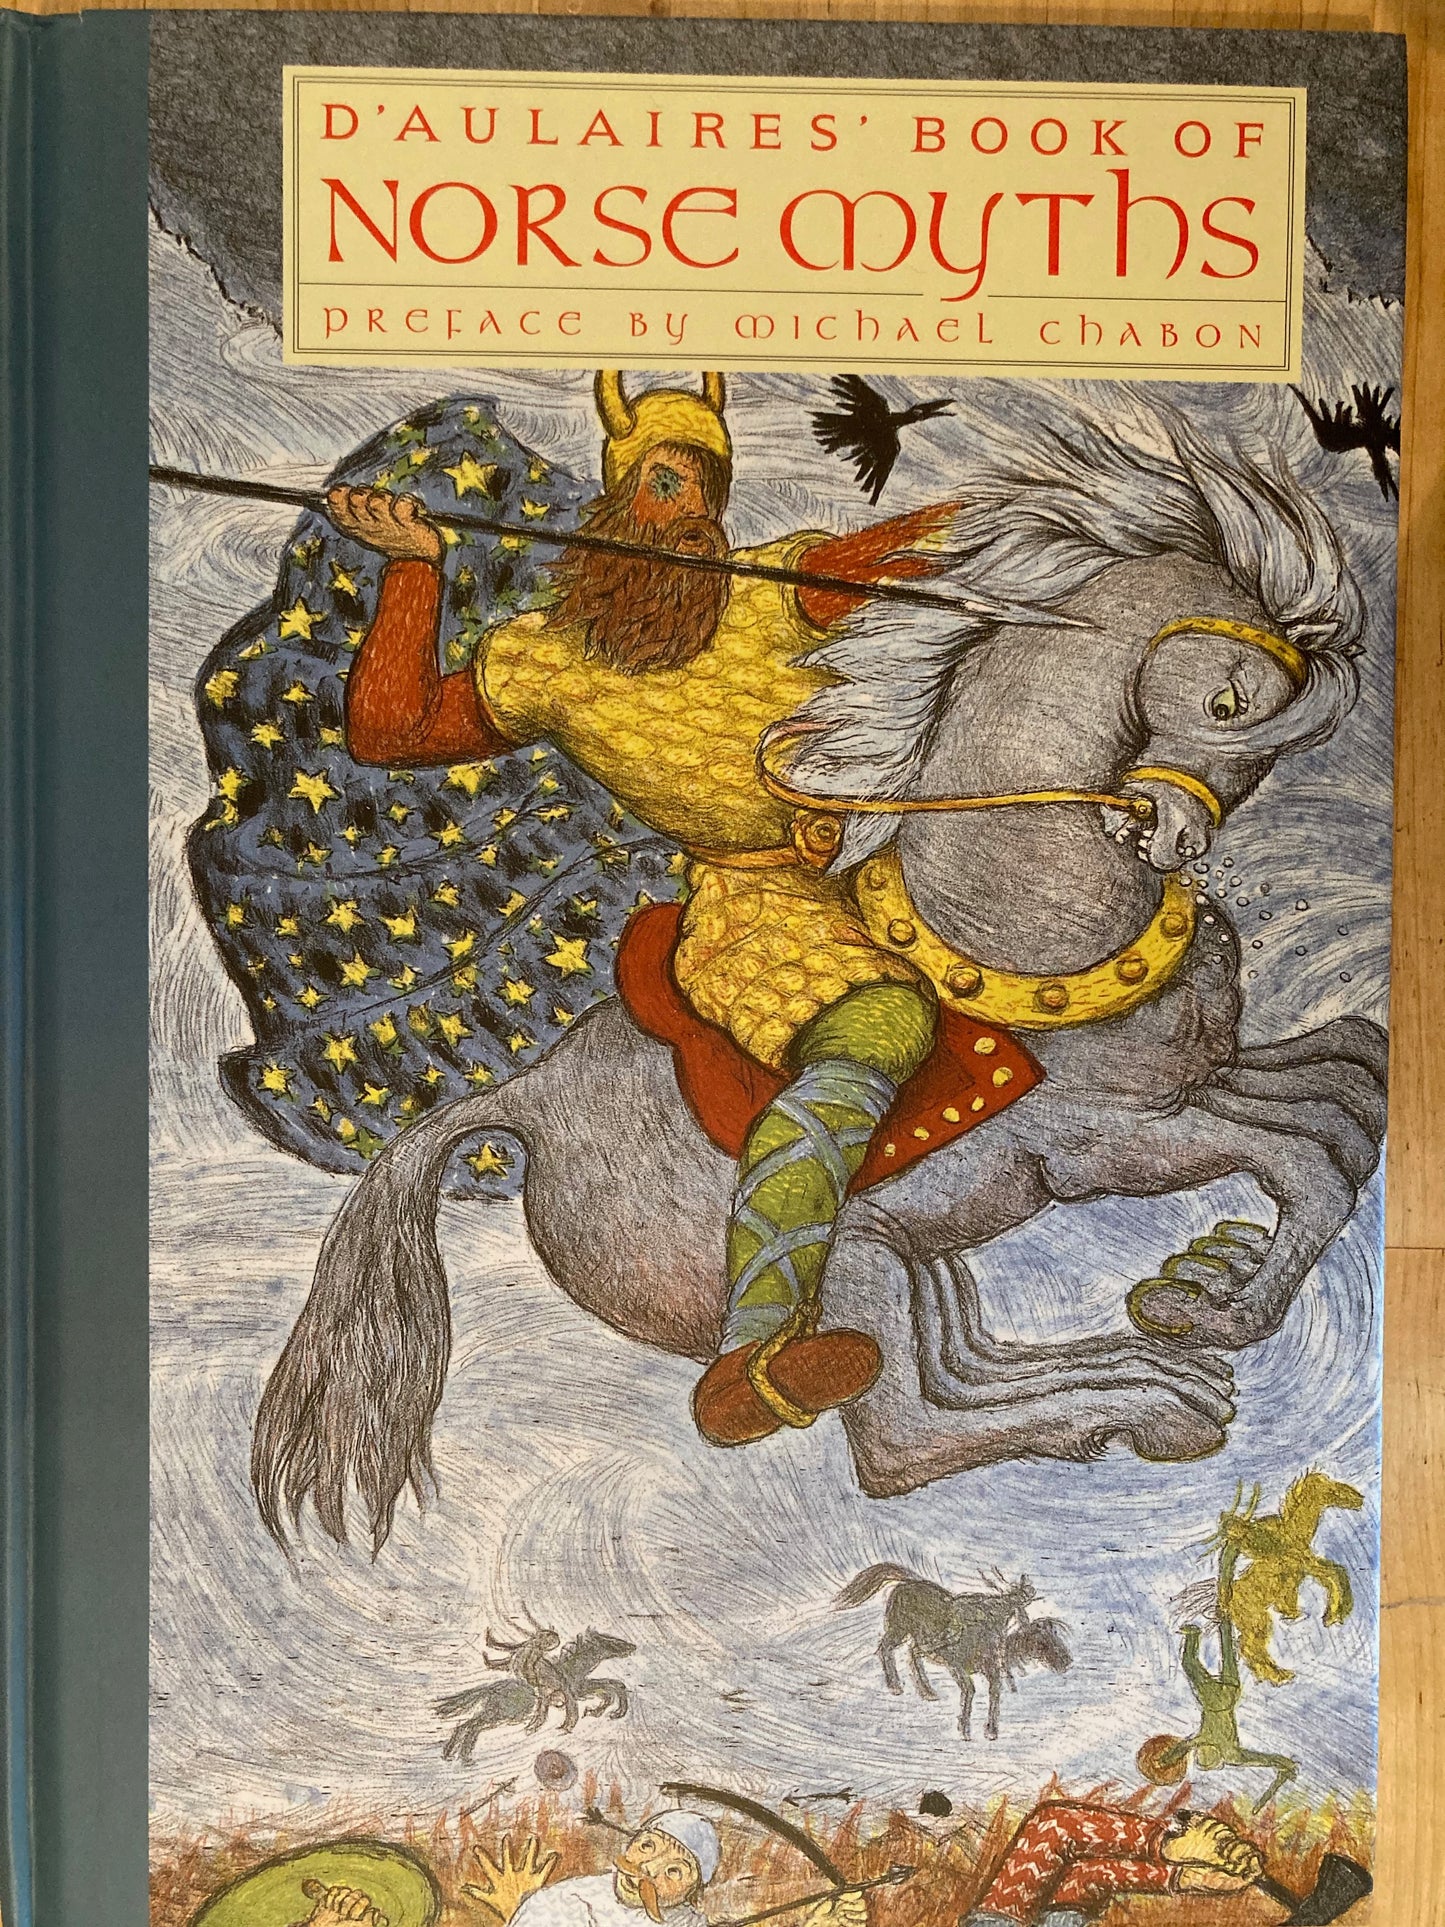 Educational Chapter Book - D'AULAIRES' BOOK OF NORSE MYTHS